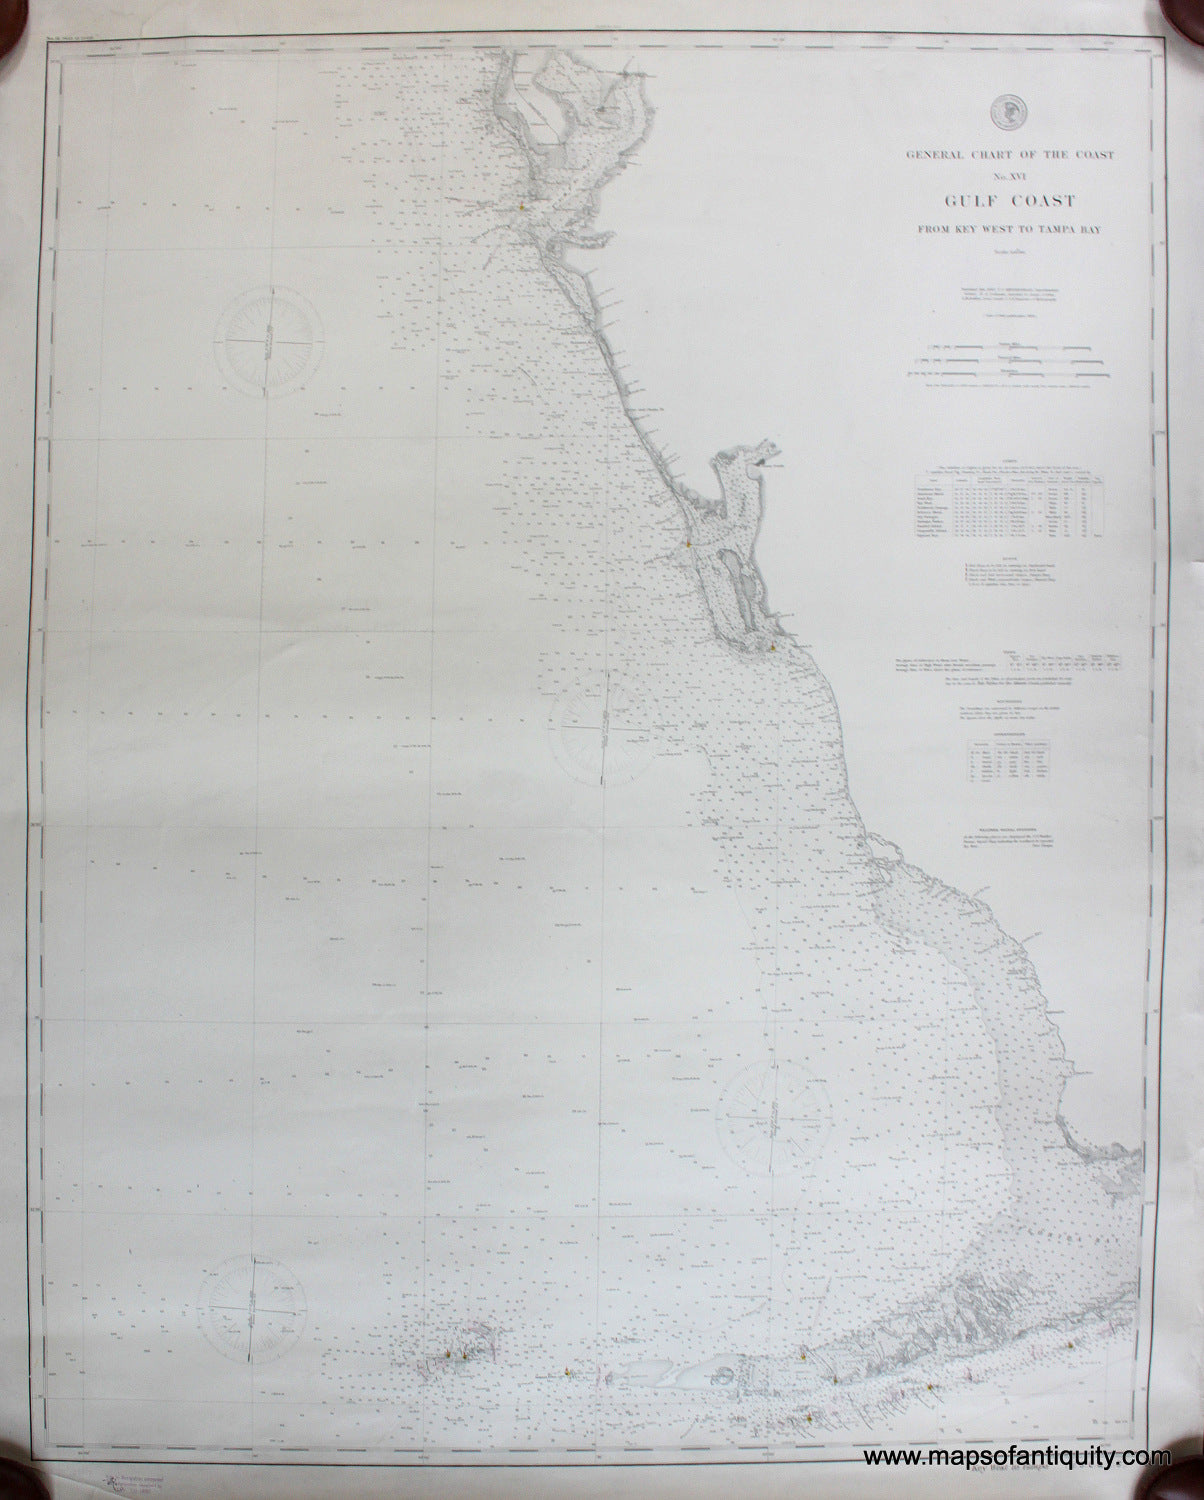 Black-and-White-Antique-Nautical-Chart-General-Chart-of-the-Coast-No.-XVI-Gulf-Coast-from-Key-West-to-Tampa-Bay-United-States-South-1889-US-Coast-and-Geodetic-Survey-Maps-Of-Antiquity